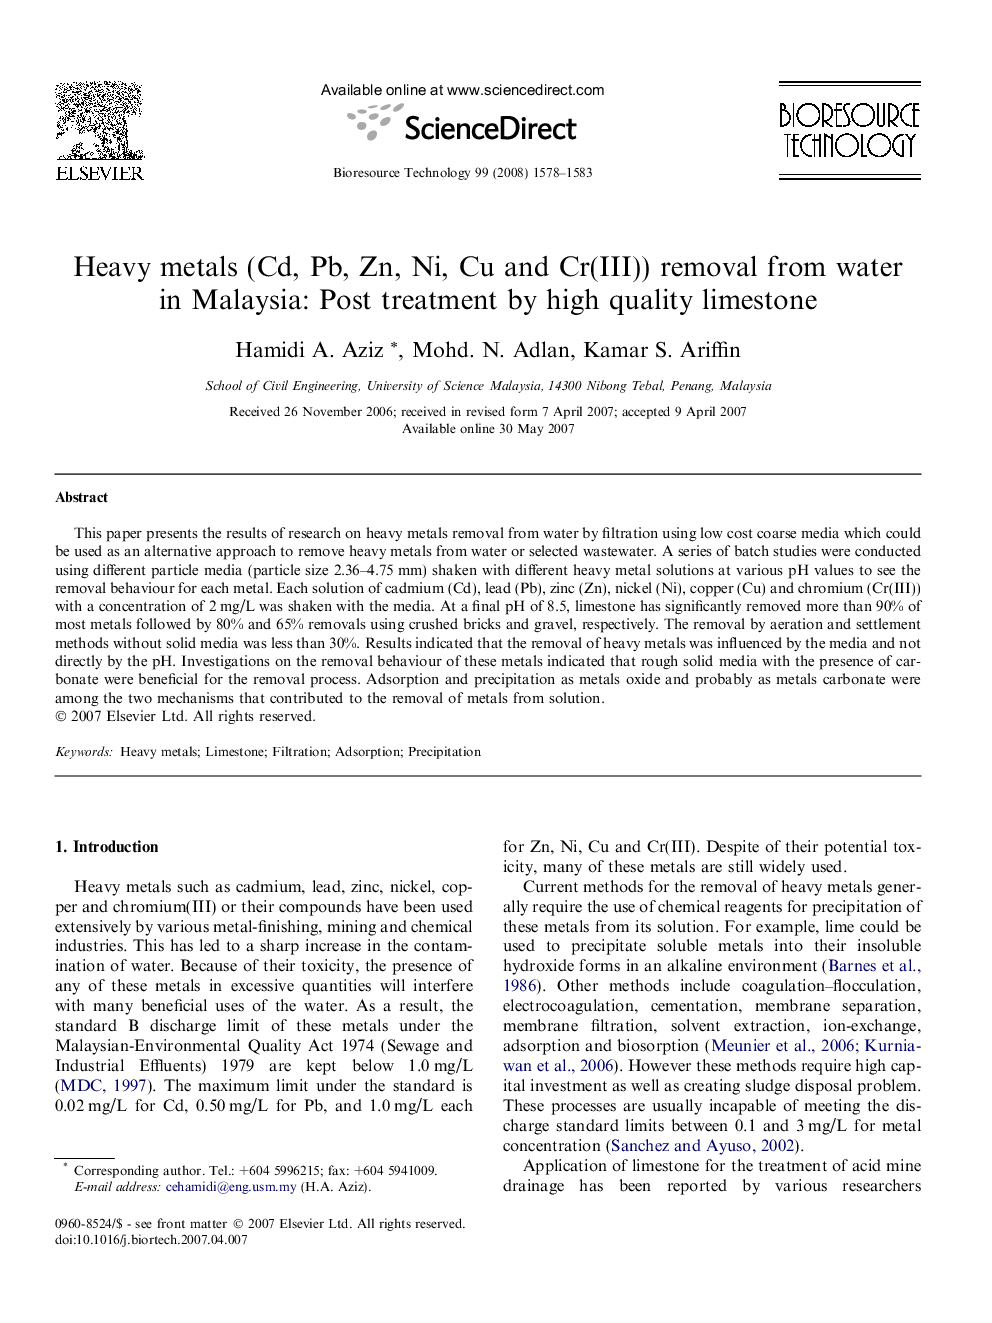 Heavy metals (Cd, Pb, Zn, Ni, Cu and Cr(III)) removal from water in Malaysia: Post treatment by high quality limestone